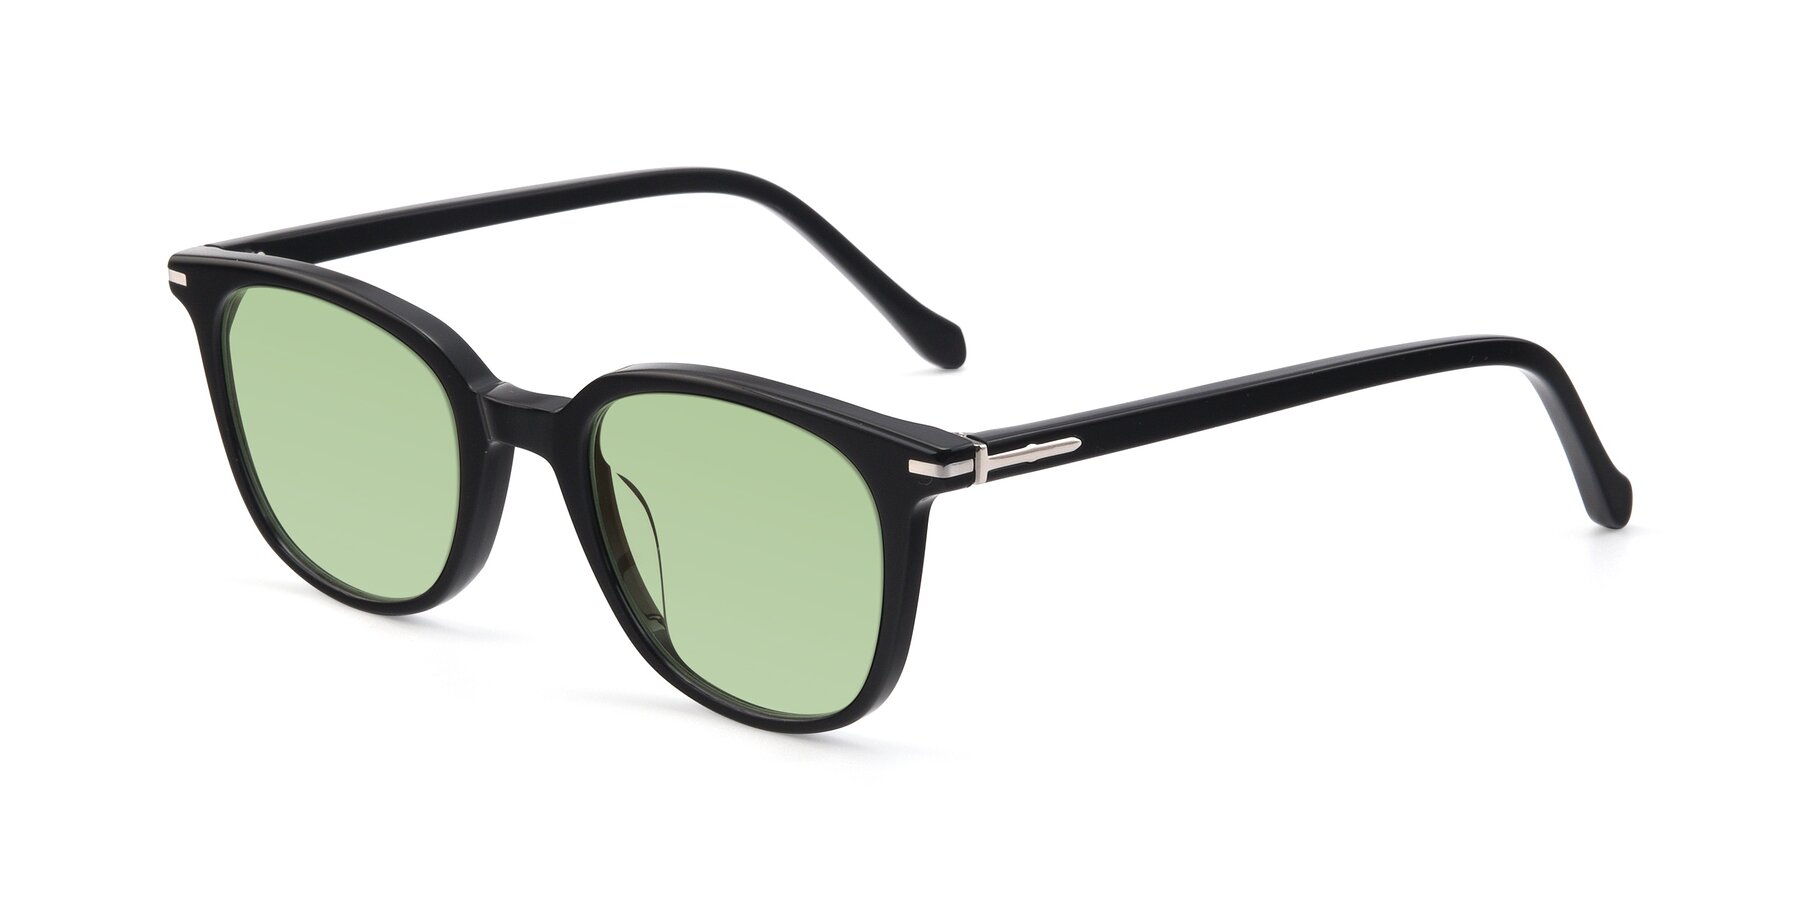 Angle of 17562 in Black with Medium Green Tinted Lenses